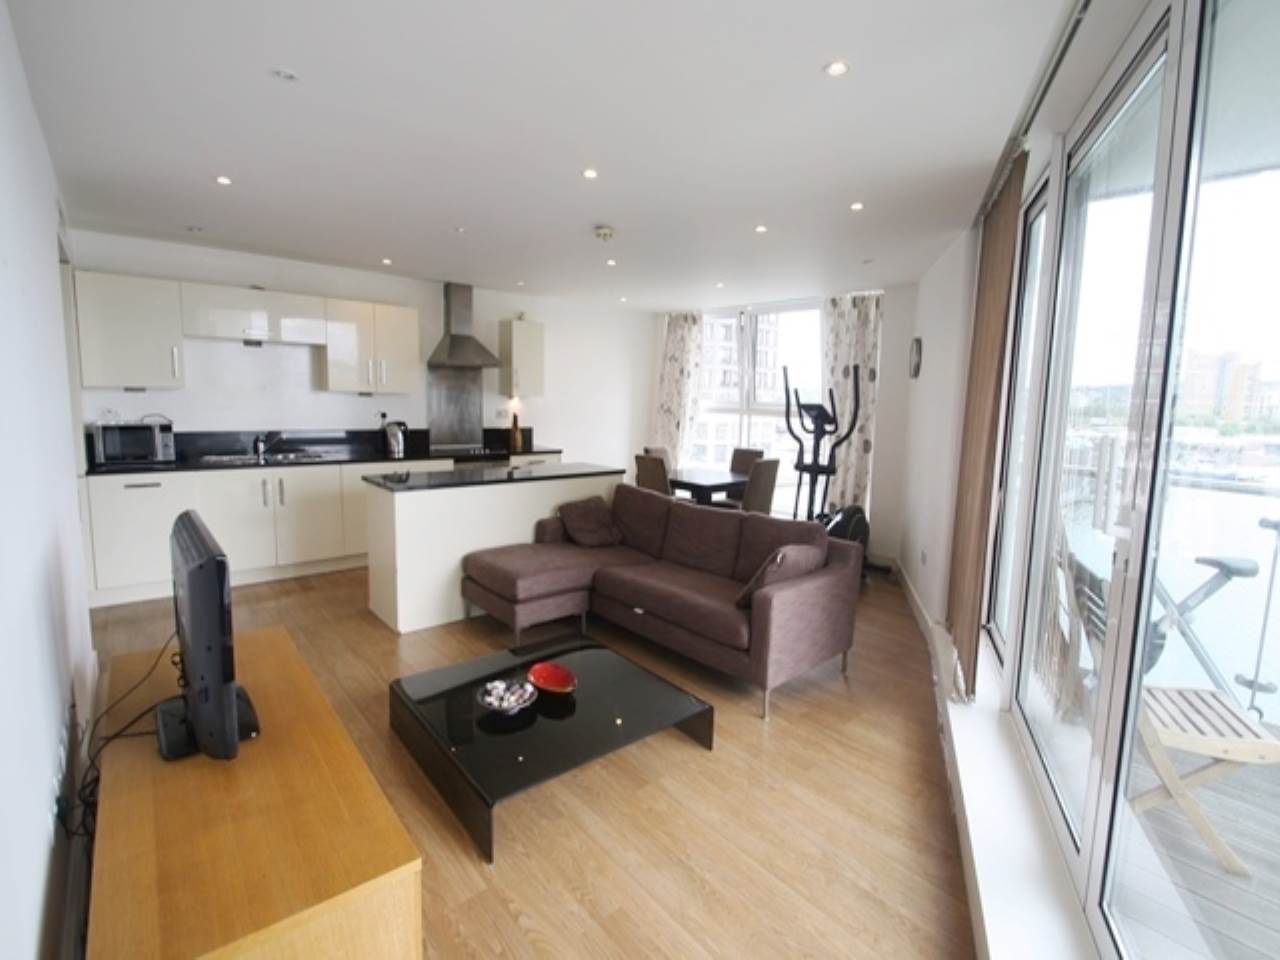 2 bed flat to rent in The Mast, Royal Docks - Property Image 1